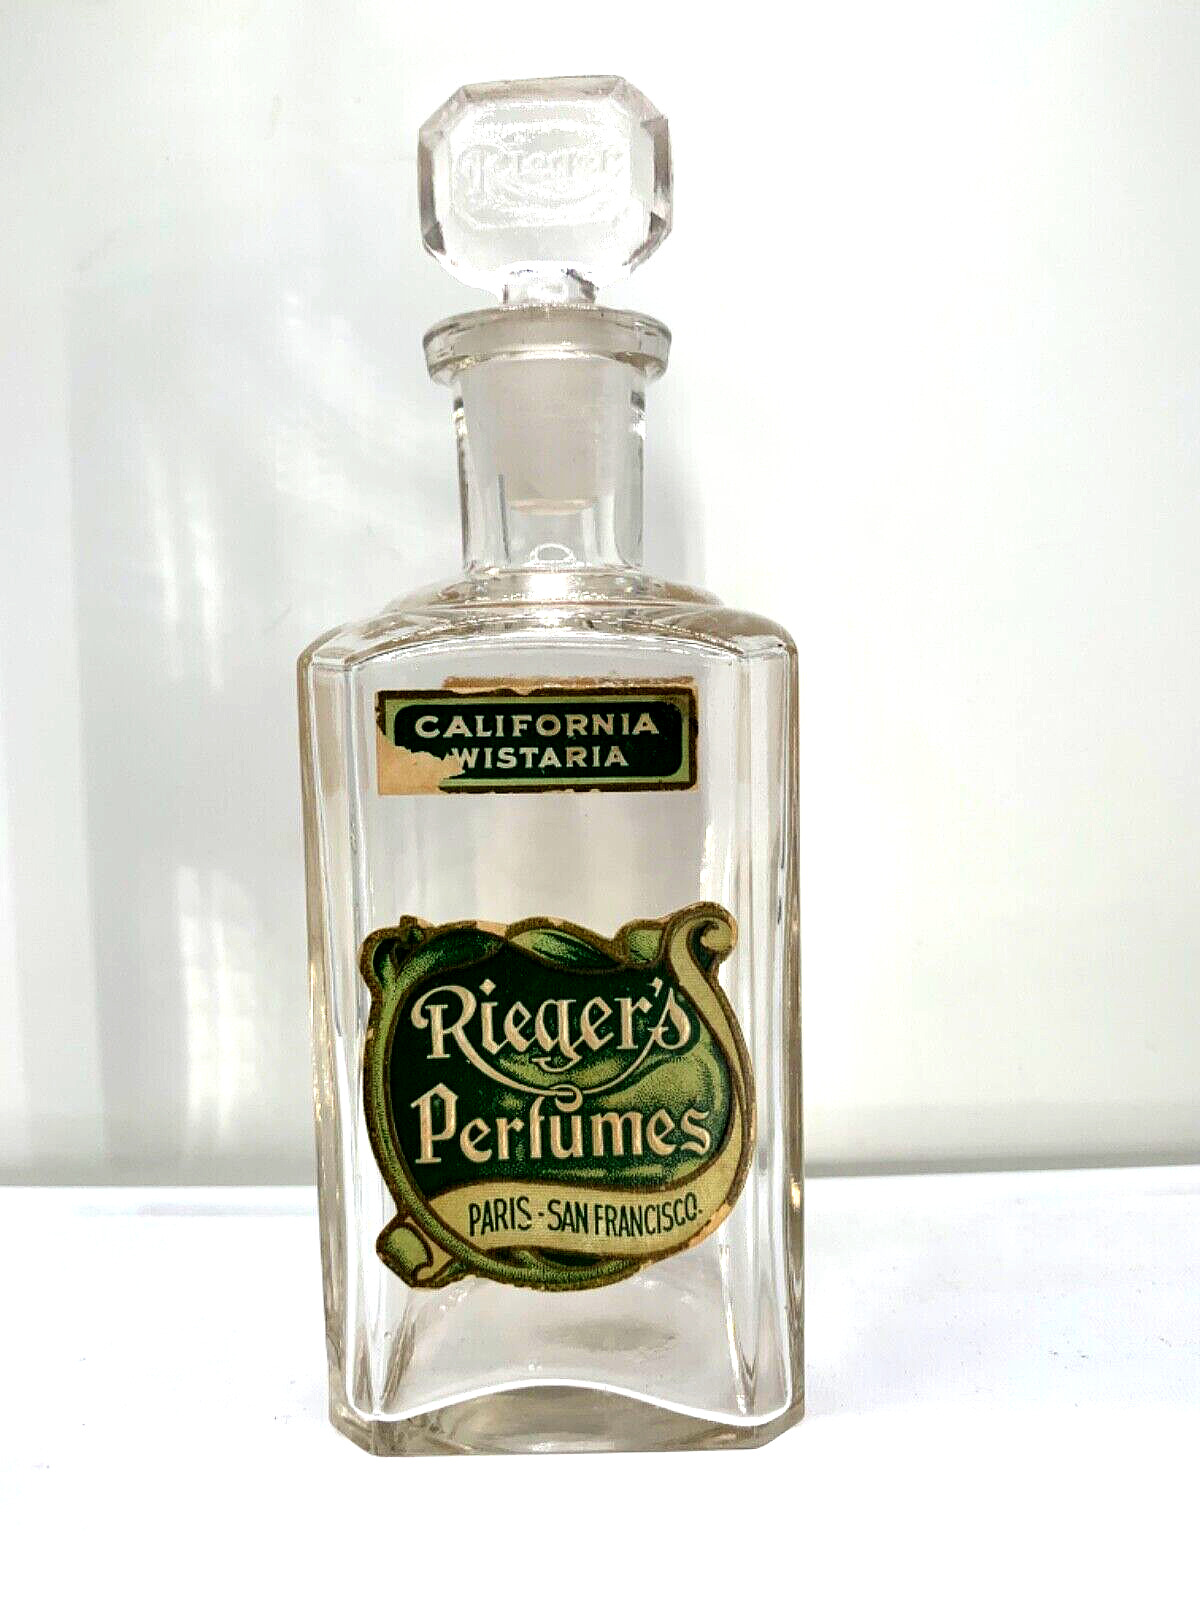 Grand  Antique perfume bottle.  California Wisteria by Rieger’s Perfumes. 1910.